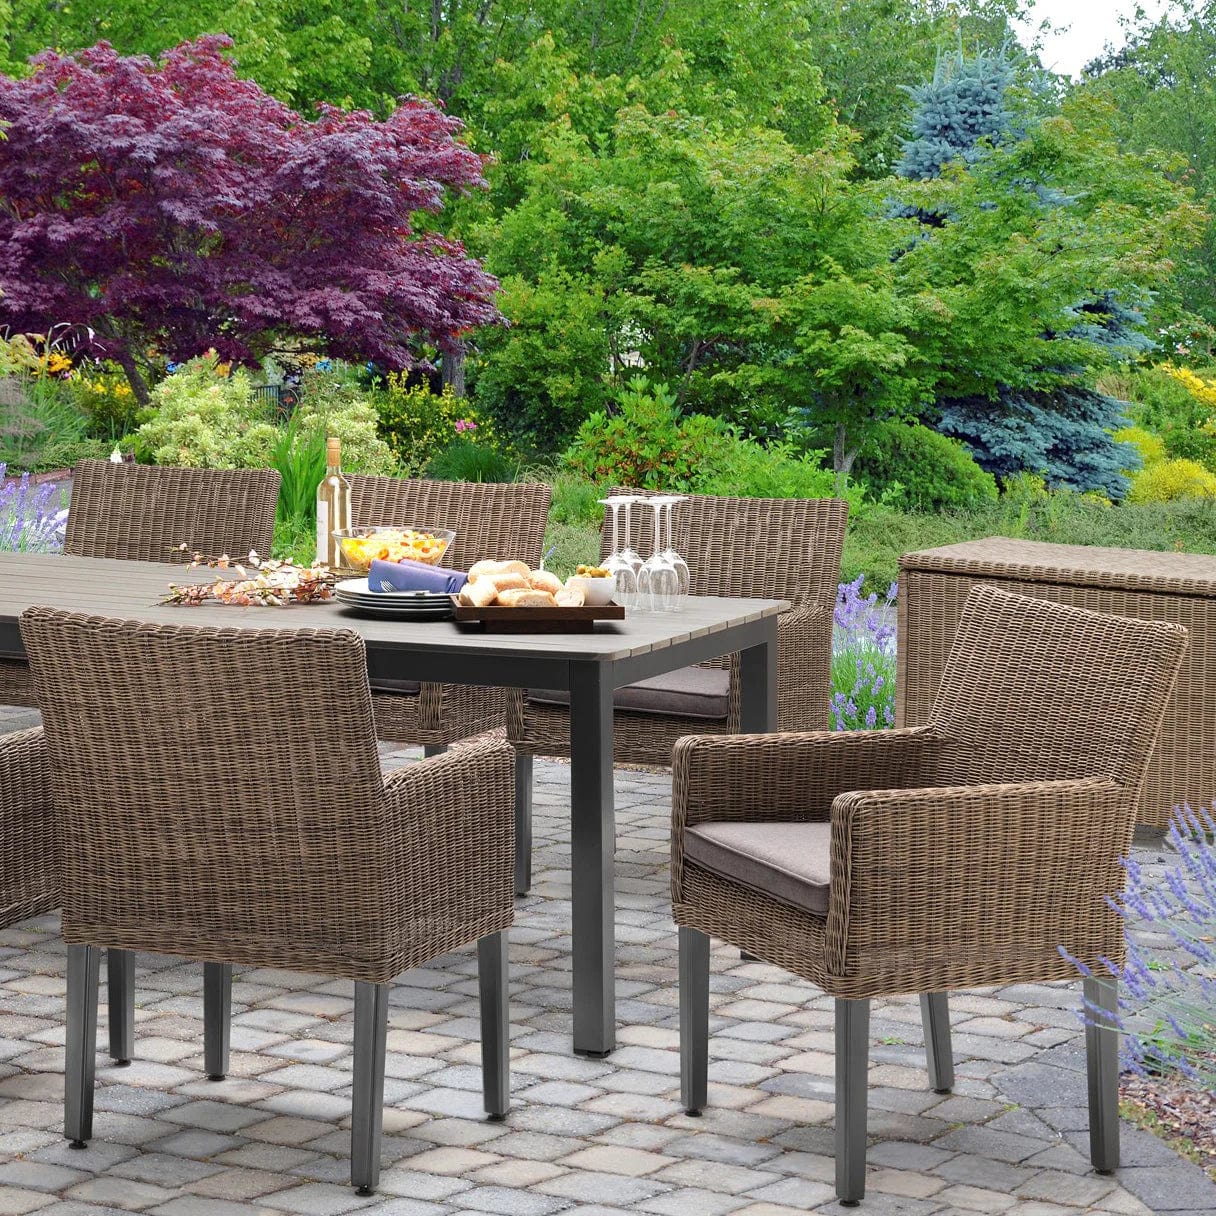 Rattan Wicker Chairs can be added to a table set